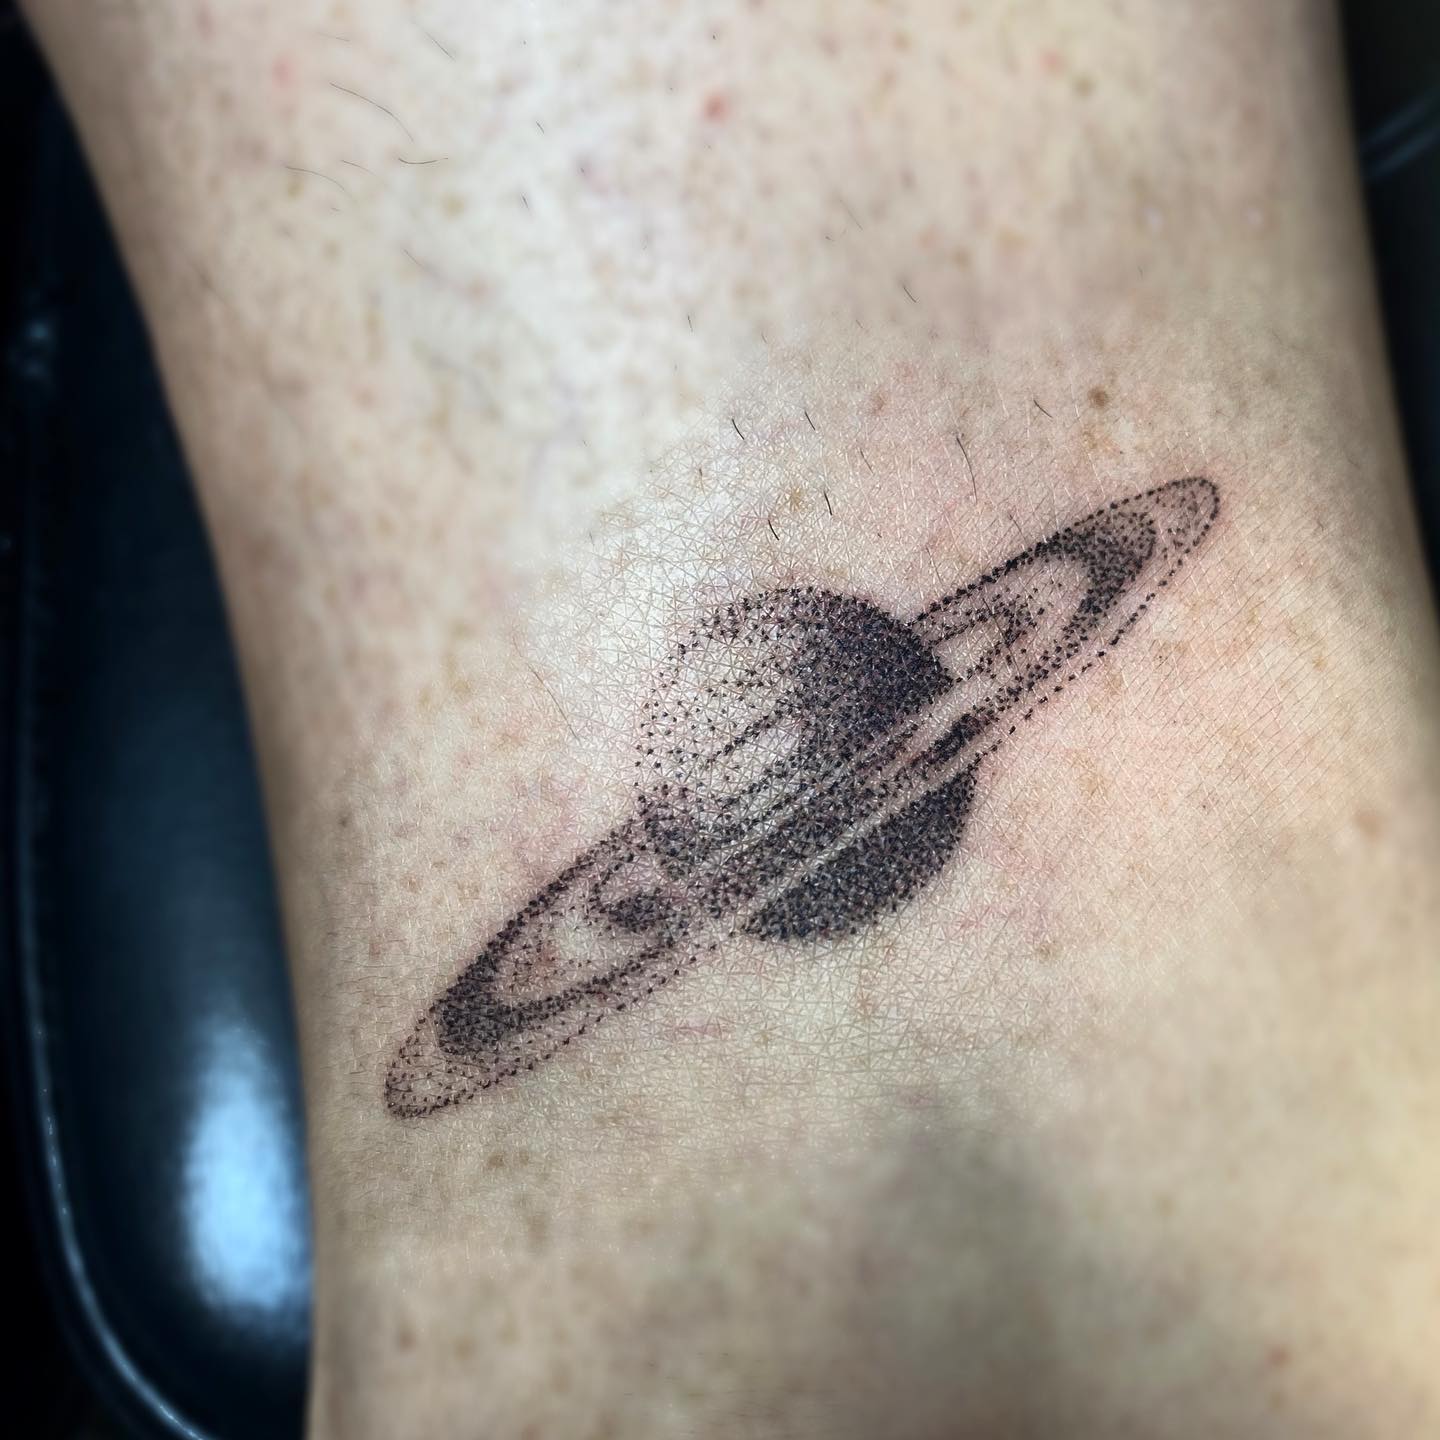 This cute design is for the ones who like detailed works and celestial things. With its ring, Saturn has always been an iconic design for many things.